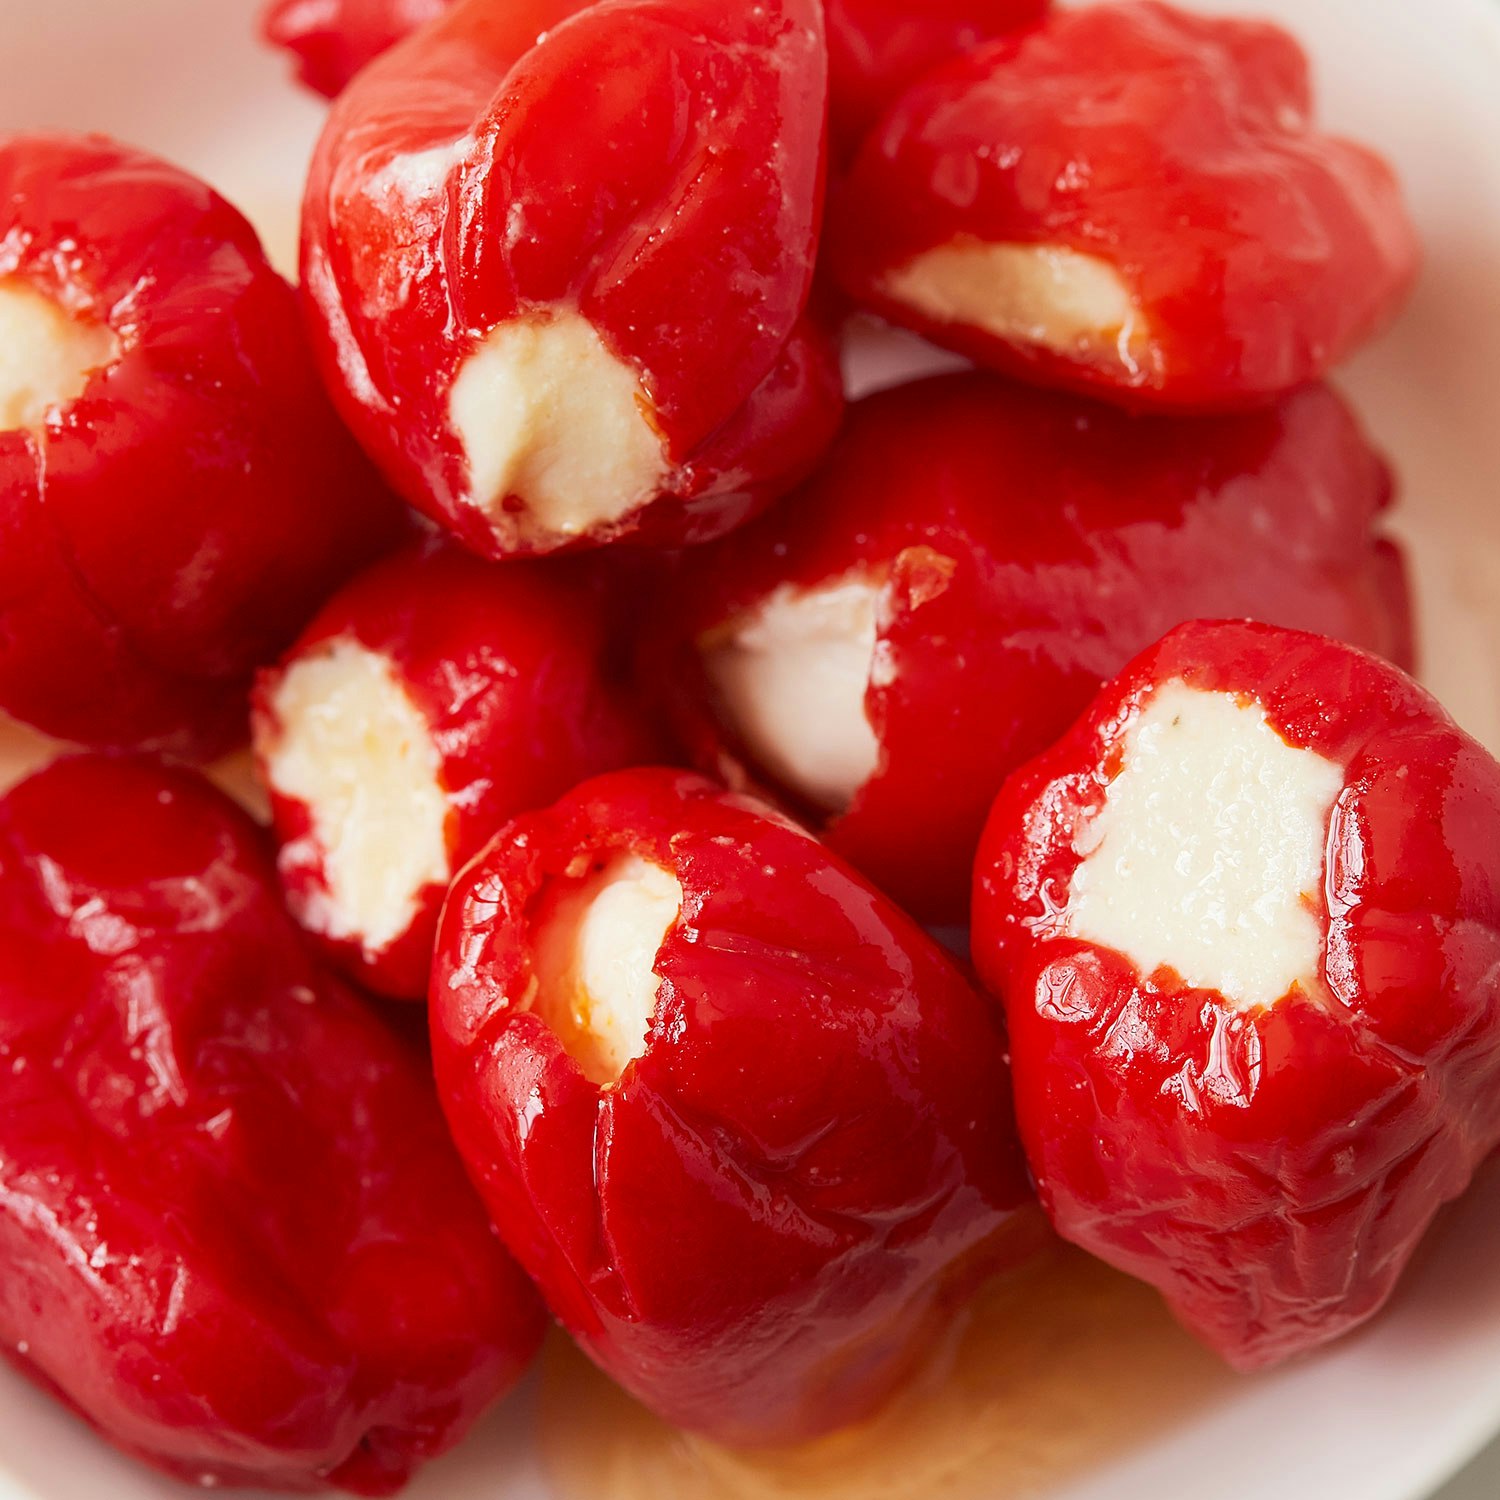 Murrays-Hot-Sweet-Peppers-Stuffed-With-Cheese-specialty-foods-127346-03